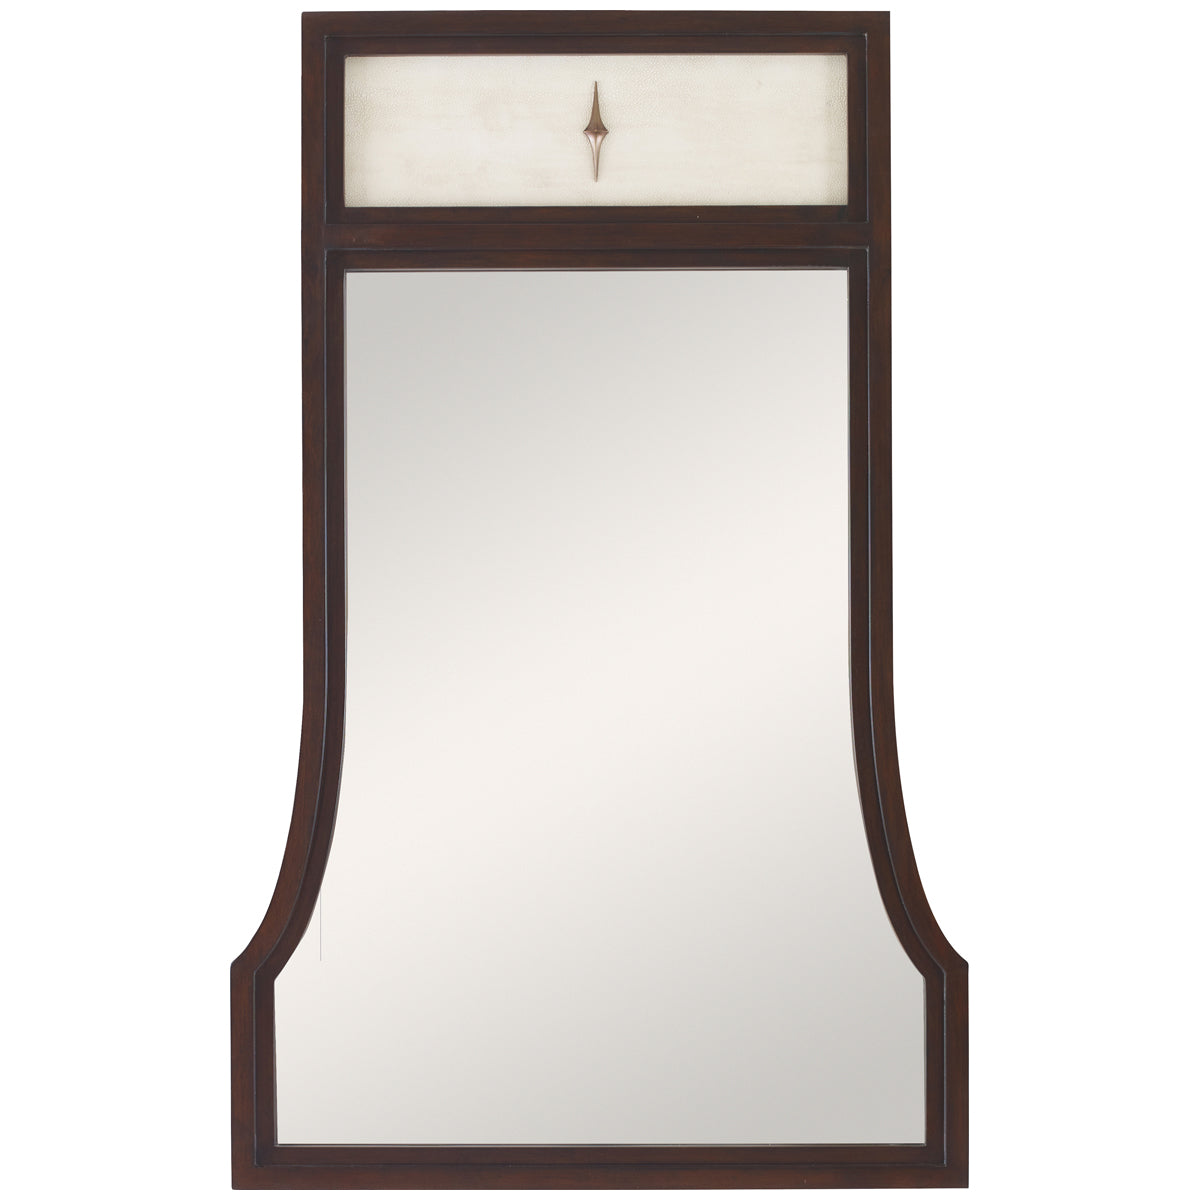 Ambella Home Tapered Mirror